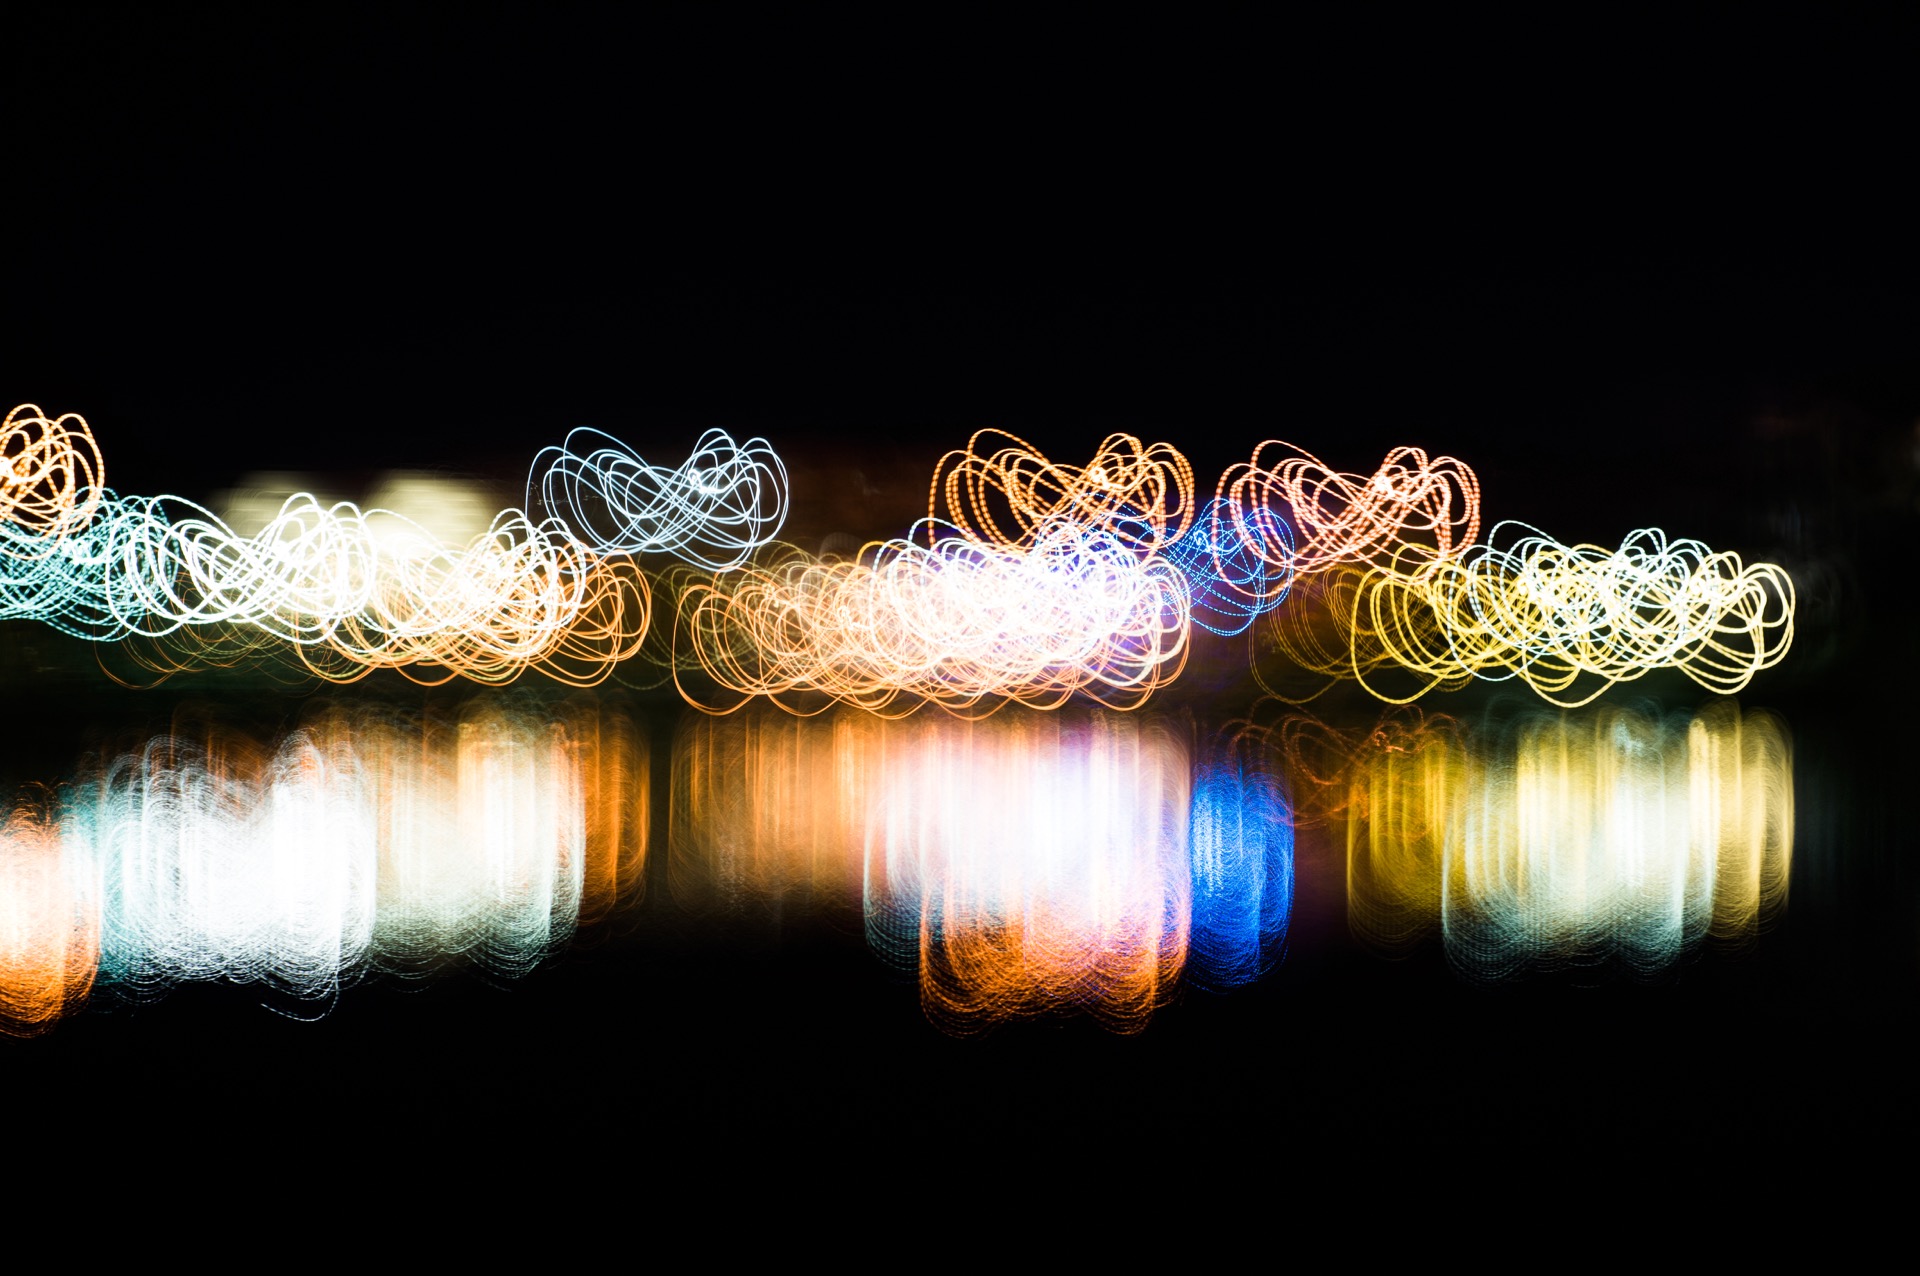 An abstract picture showing eternity loops symbols using light painting technique with vivid mixed rainbow colors on a black background